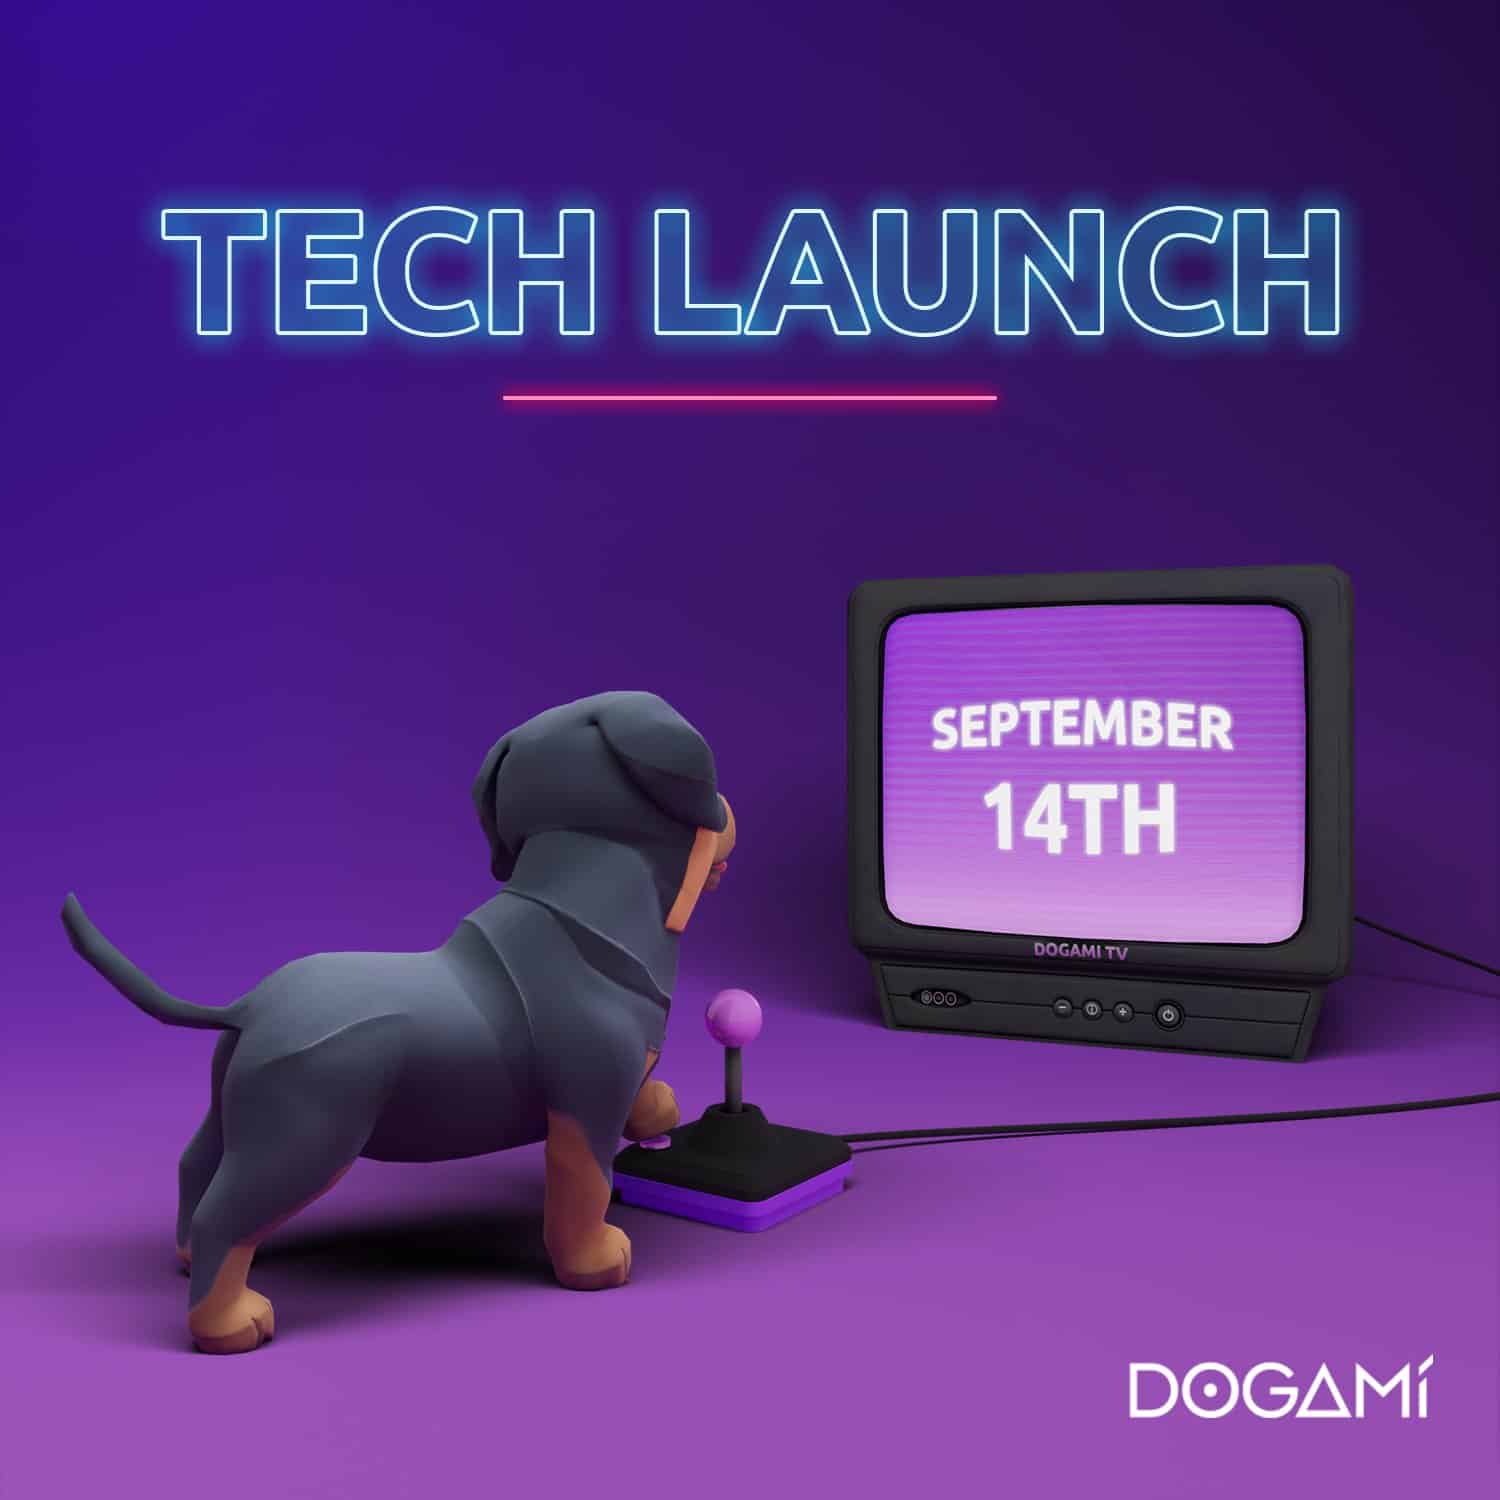 Dogami Tech launch poster as seen on Twitter.